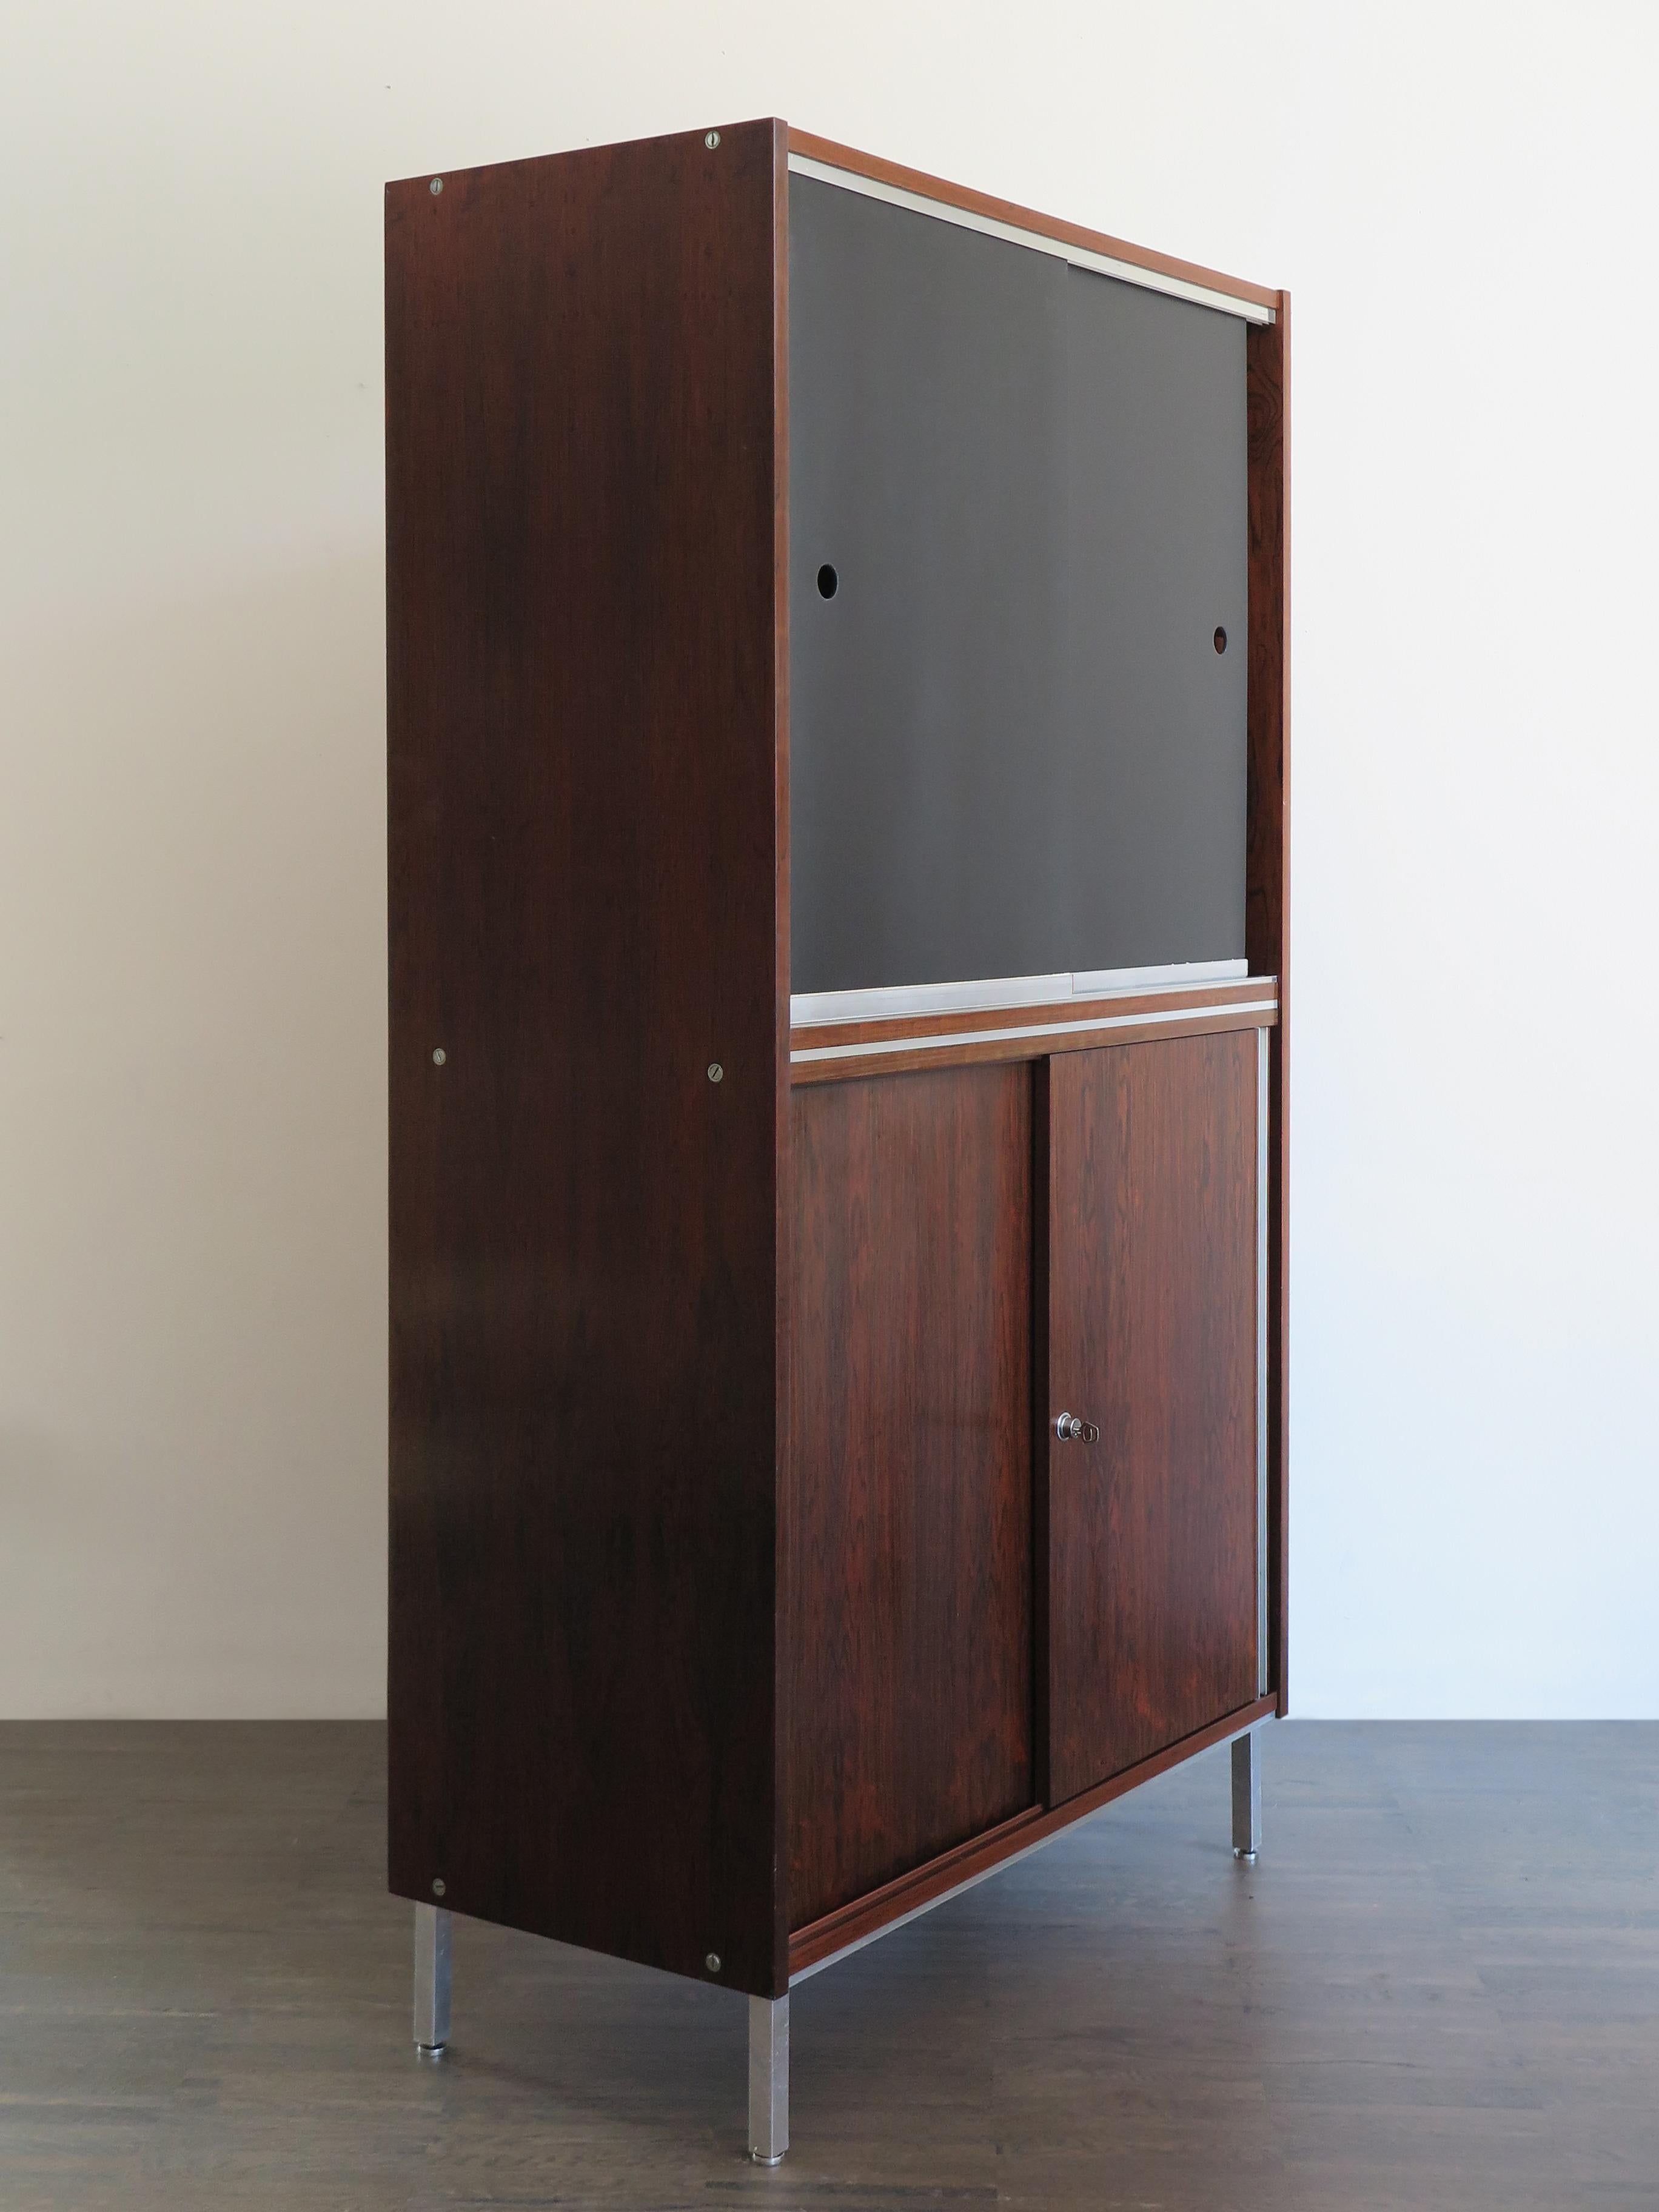 1960s rosewood cabinet or office cabinet designed by George Nelson with metal and aluminium detail and original key,
new black sliding doors.